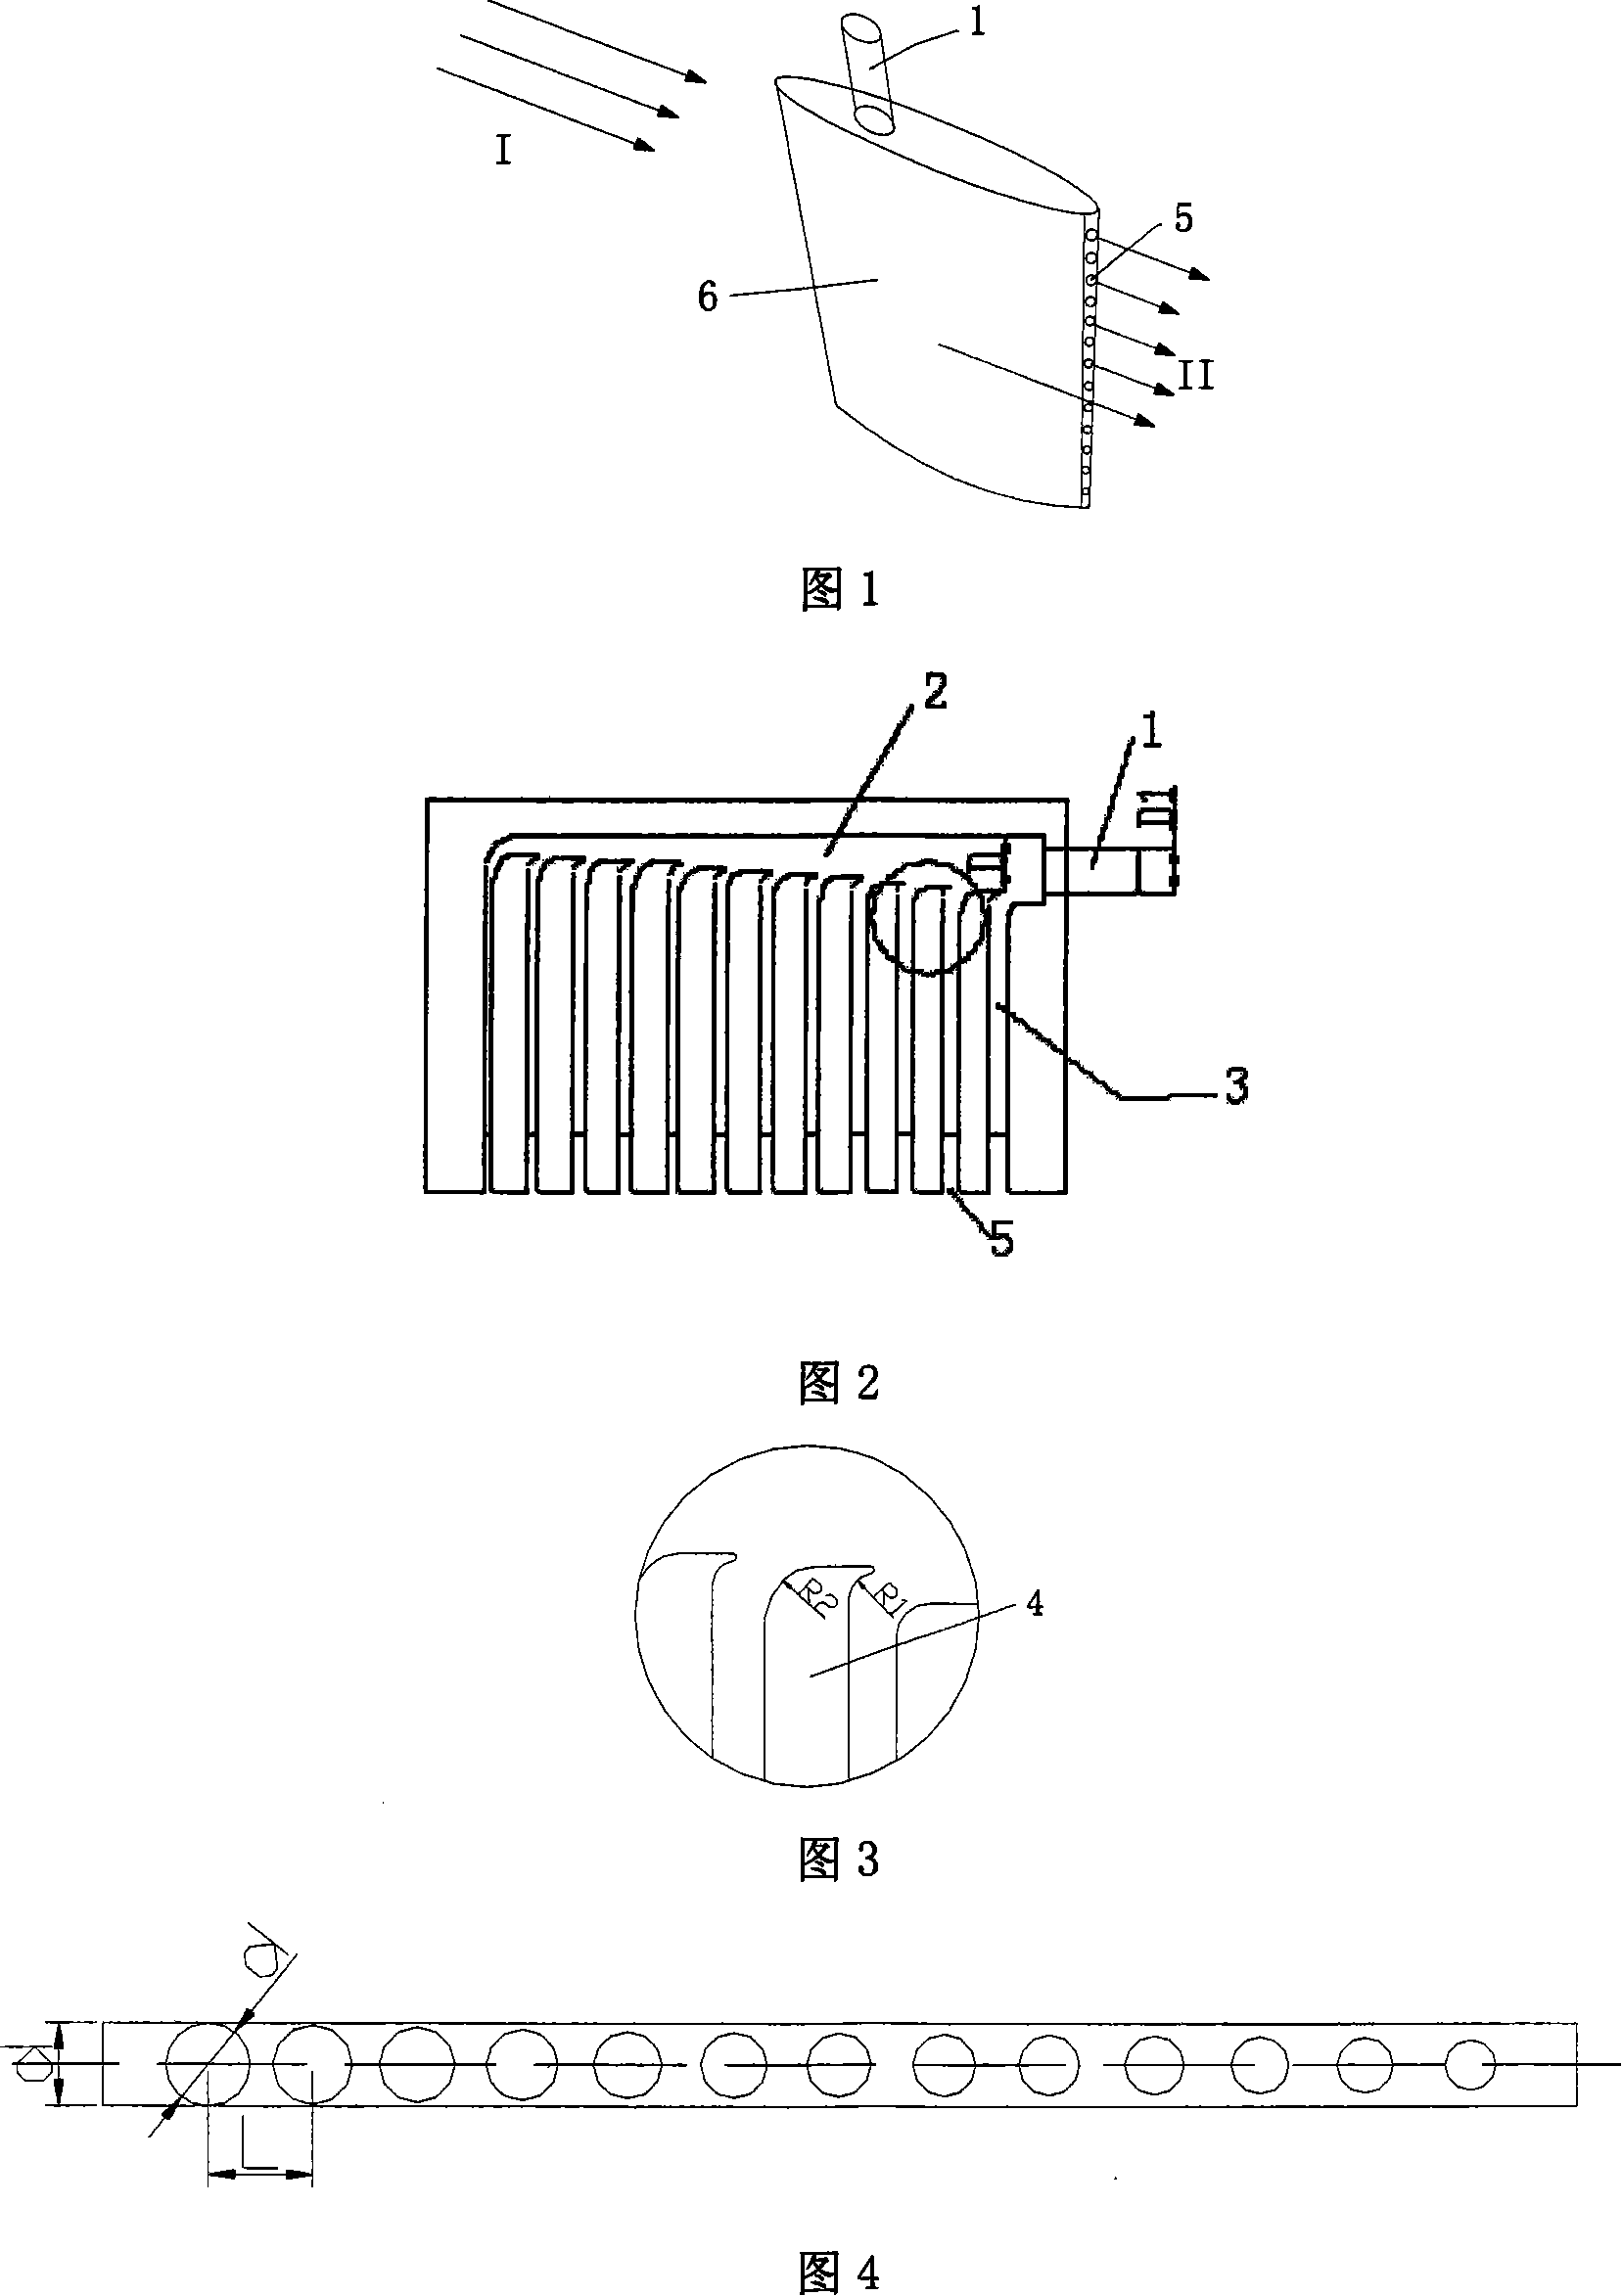 Impeller mechanical wing profile with trailing edge ejection